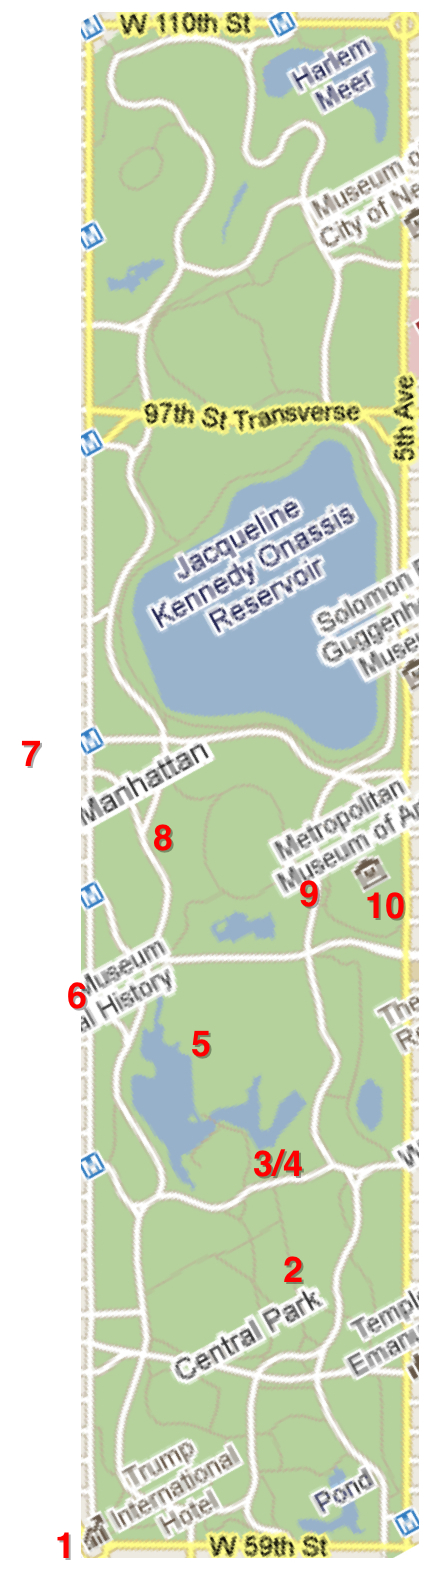 Central Park Itinerary